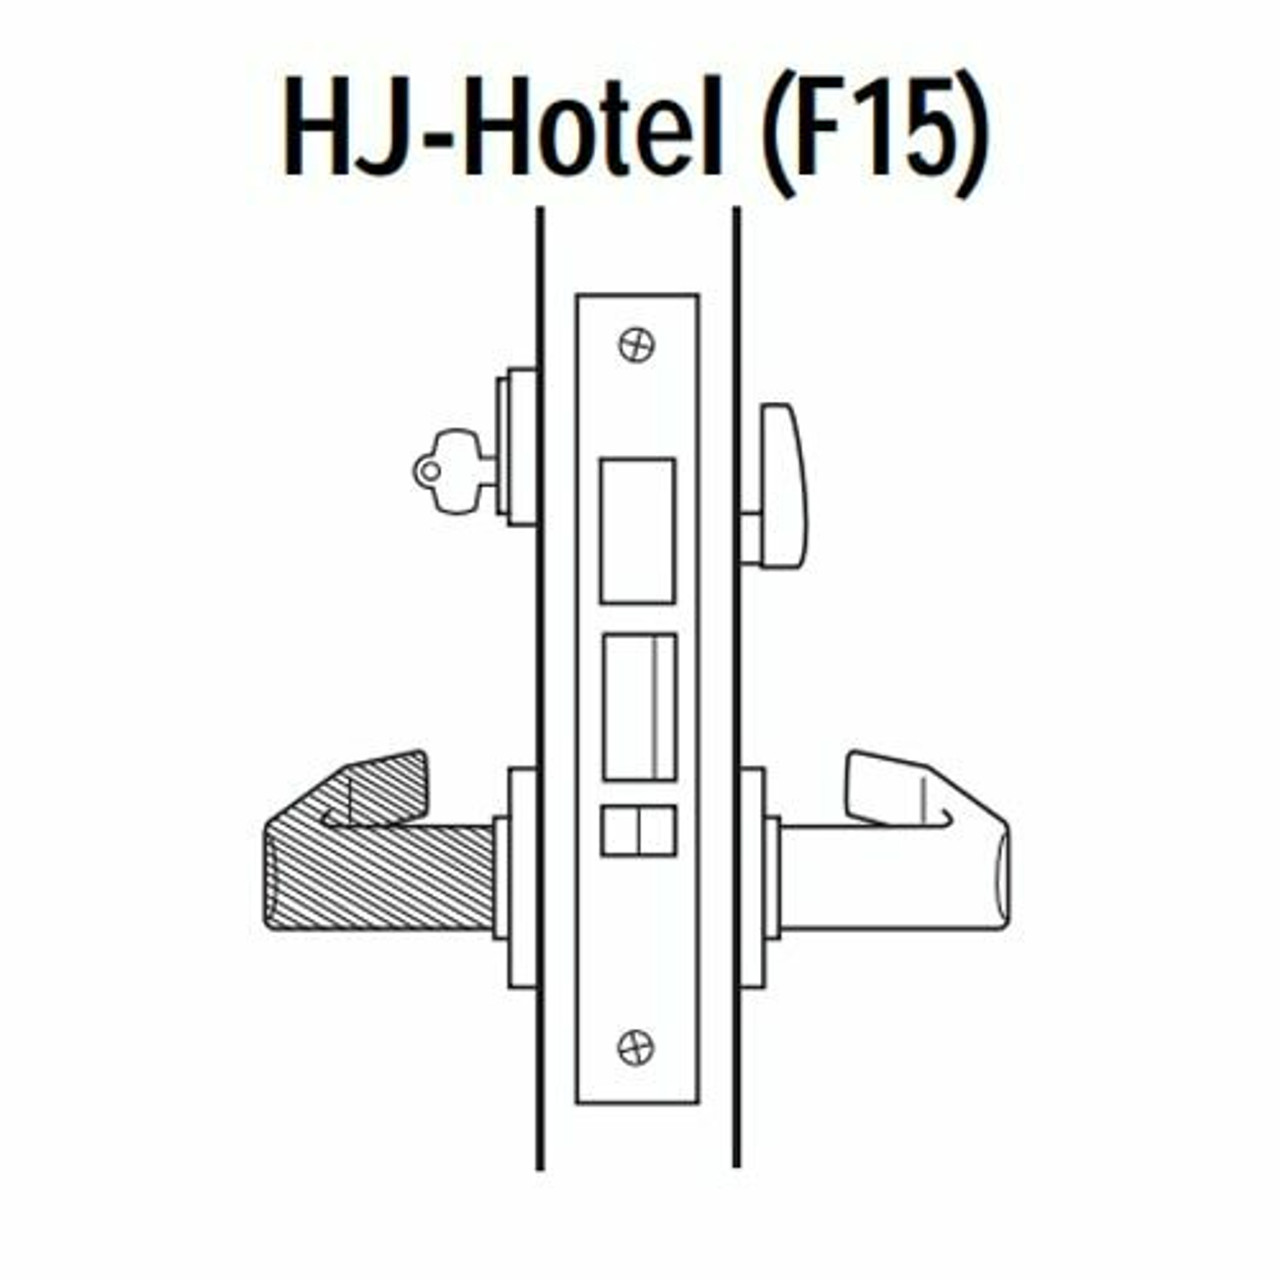 45H7HJ17LN625 Best 40H Series Hotel with Deadbolt Heavy Duty Mortise Lever Lock with Gull Wing LH in Bright Chrome